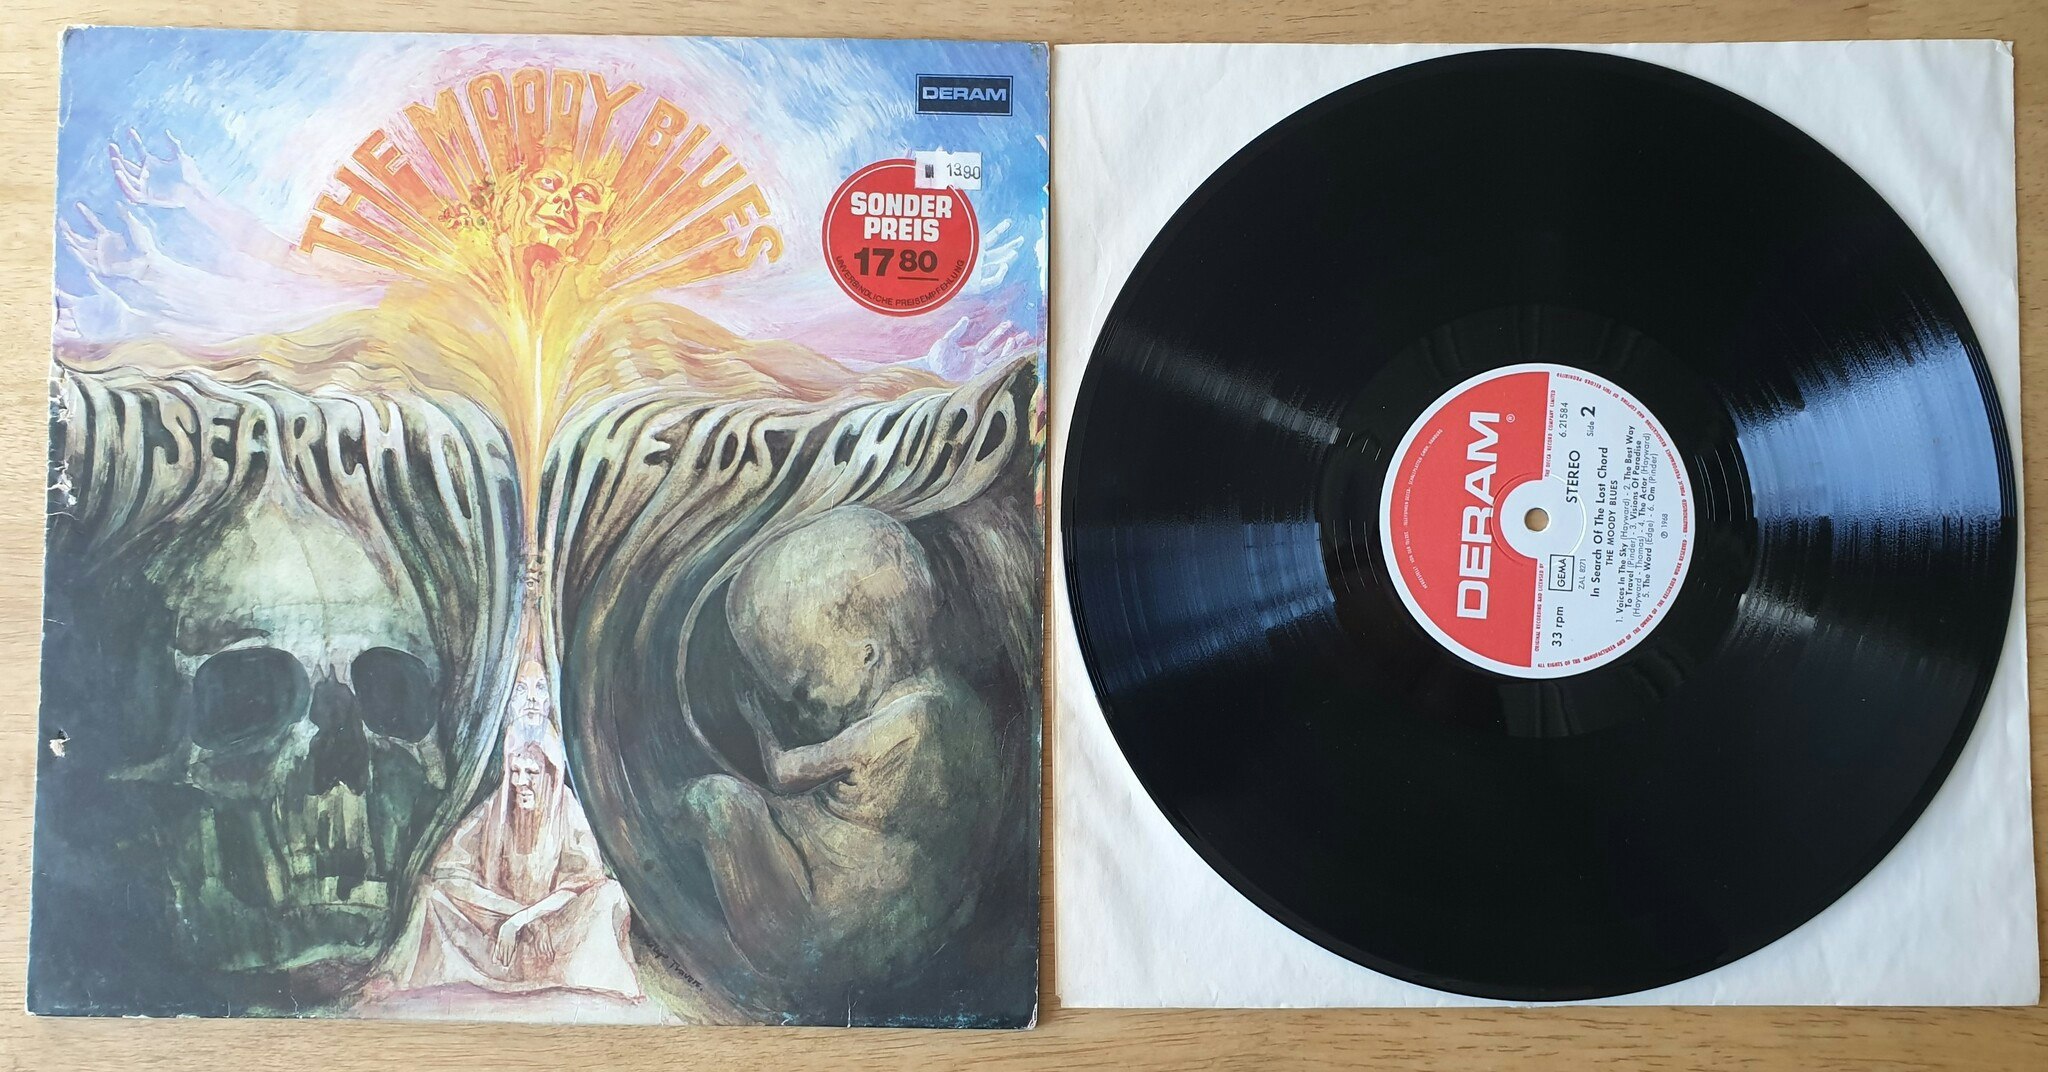 The Moody Blues, In search of the lost chord. Vinyl LP